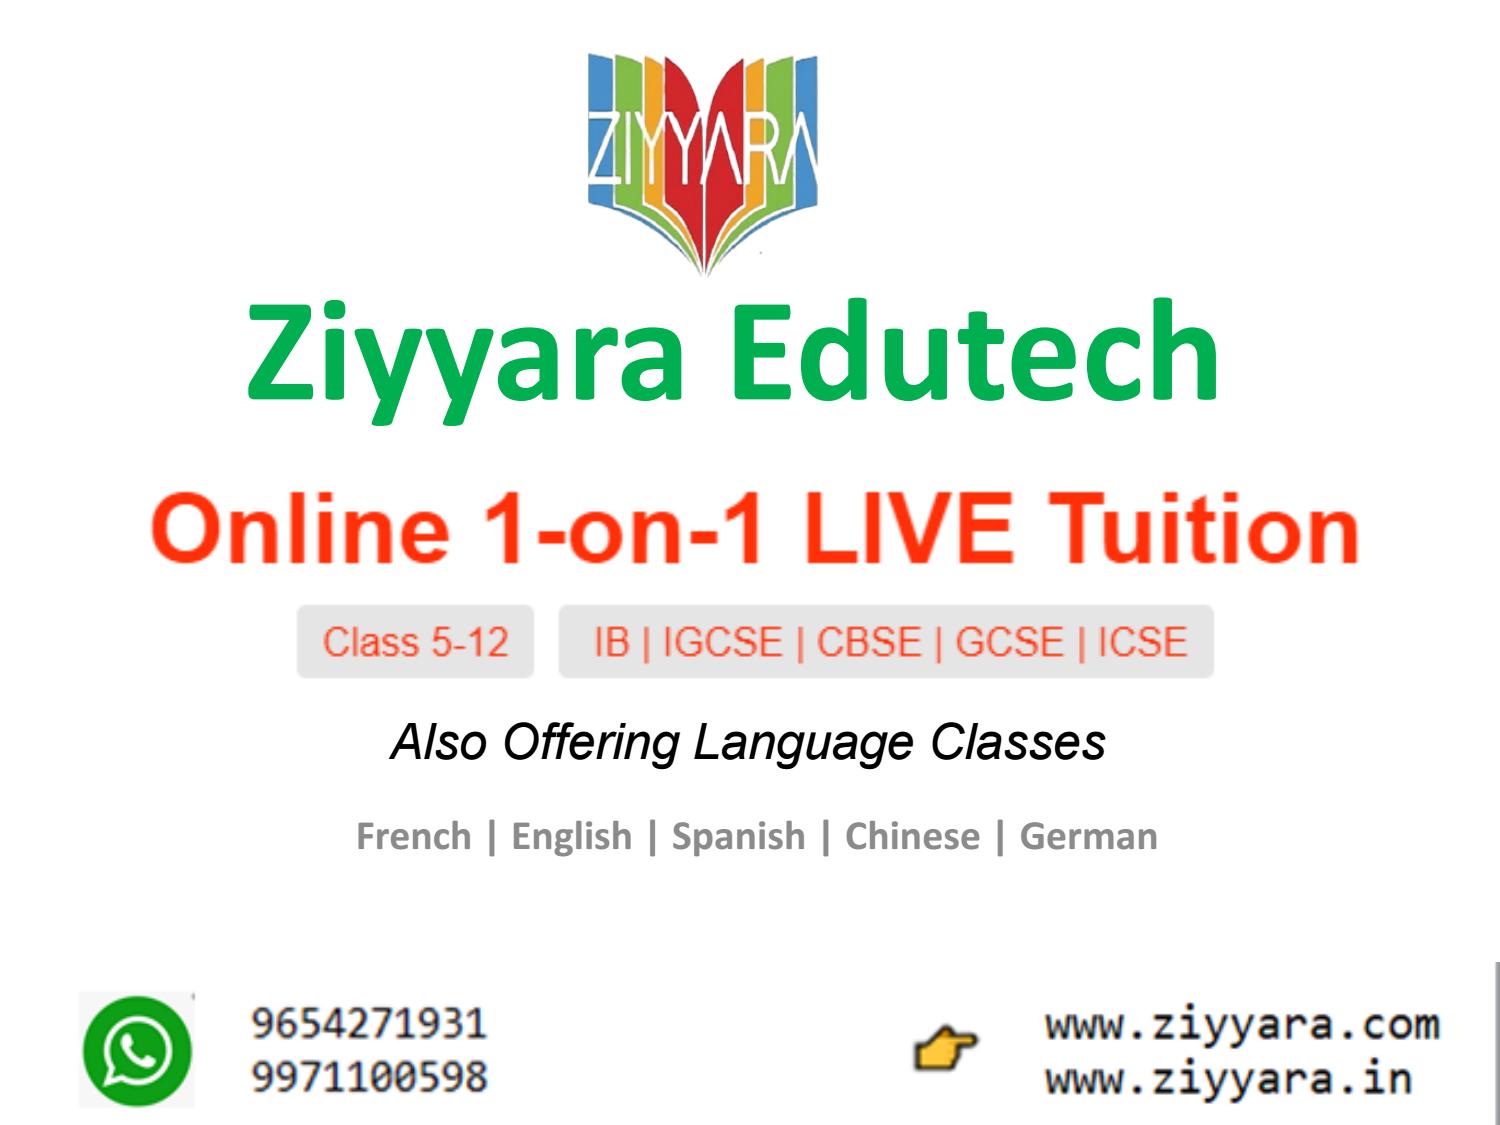 Get The Best One-On-One Live Online Tuition ClassesEducation and LearningCoaching ClassesNoidaNoida Sector 16